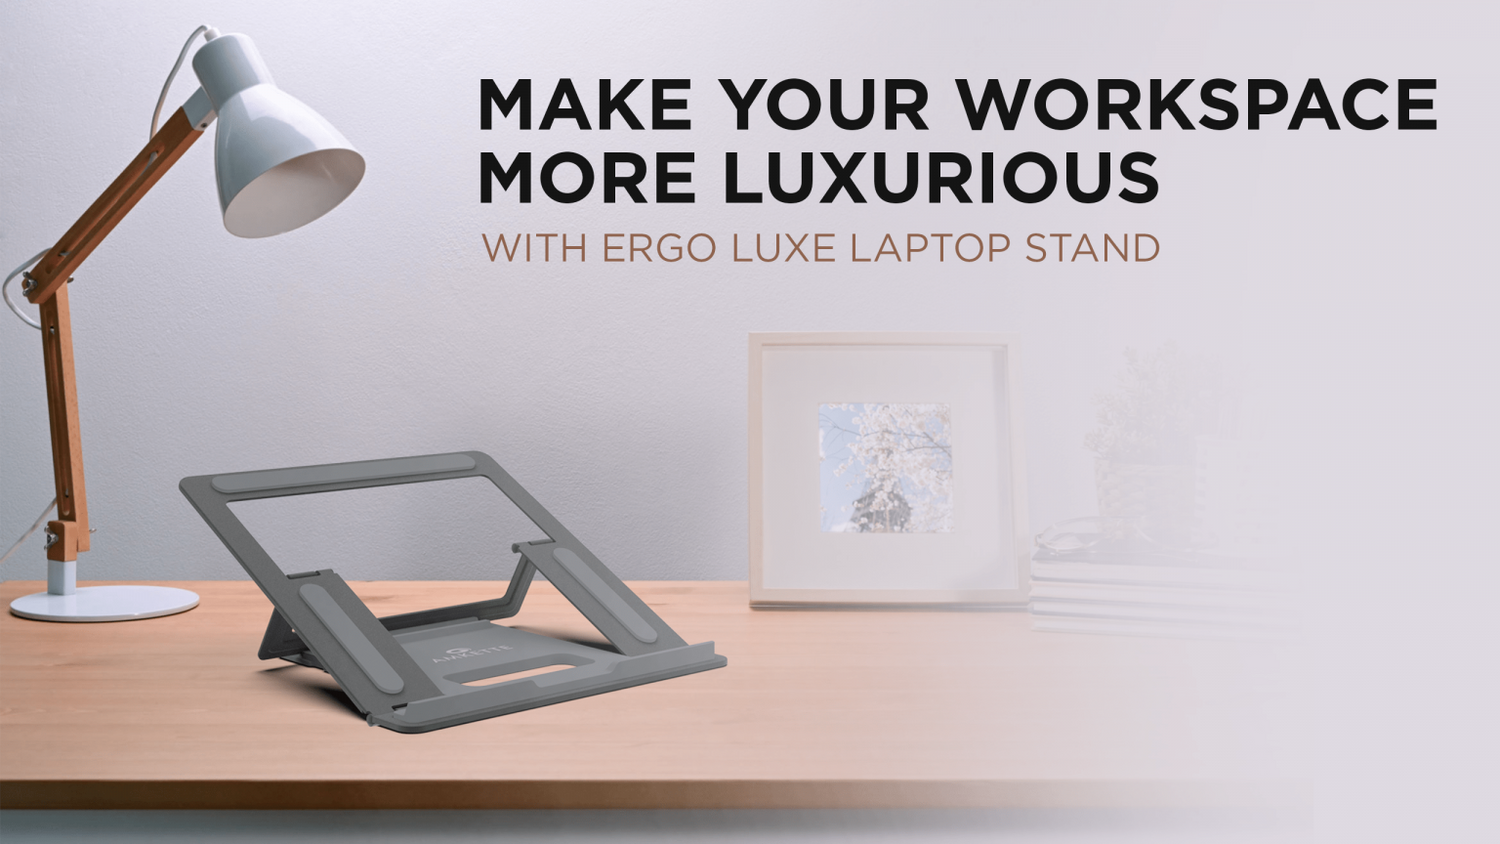 Ergo Luxe Laptop Stand To Make Your Boring Workspace More Luxurious